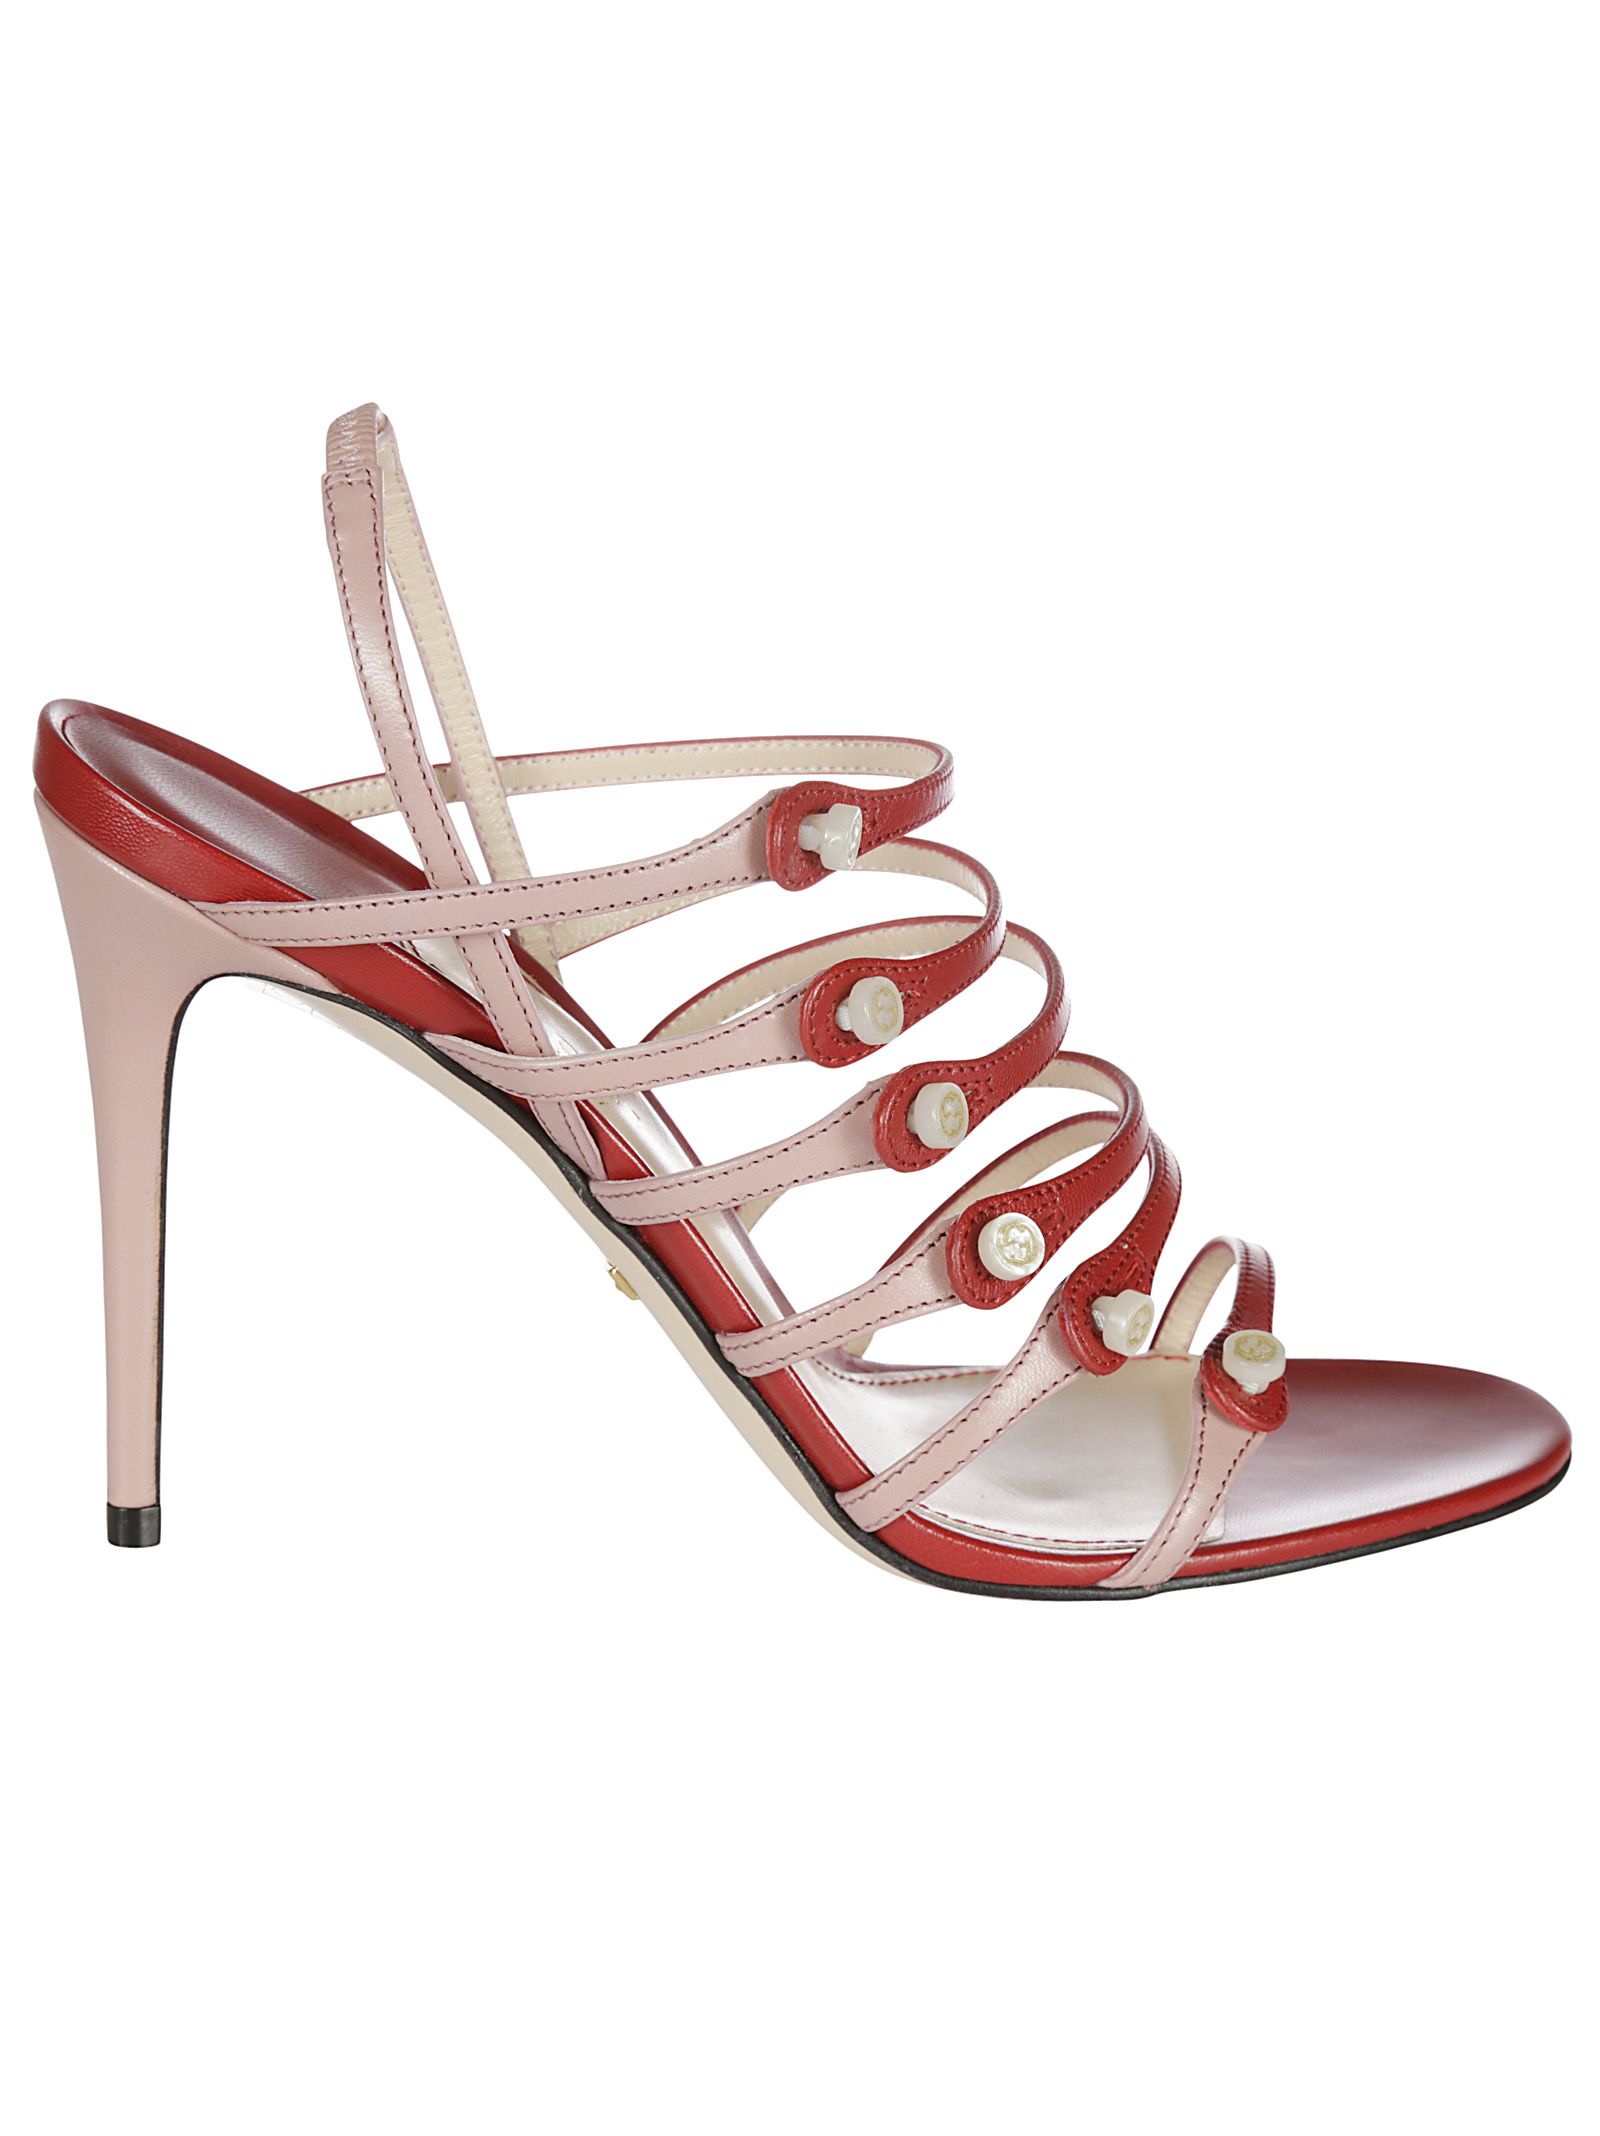 Gucci - Gucci Leather Open Toe Sandals - Red, Women's Sandals | Italist